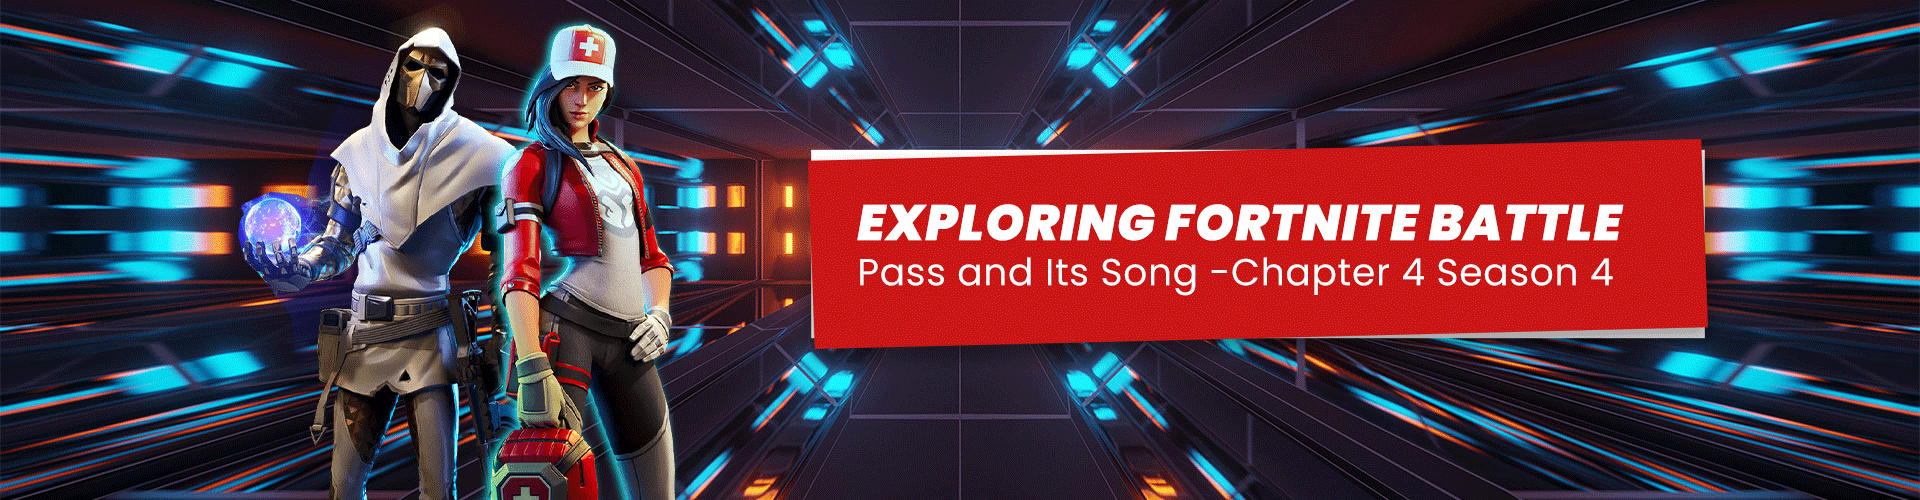 Exploring Fortnite Battle Pass and Song -Chapter 4 Season 4